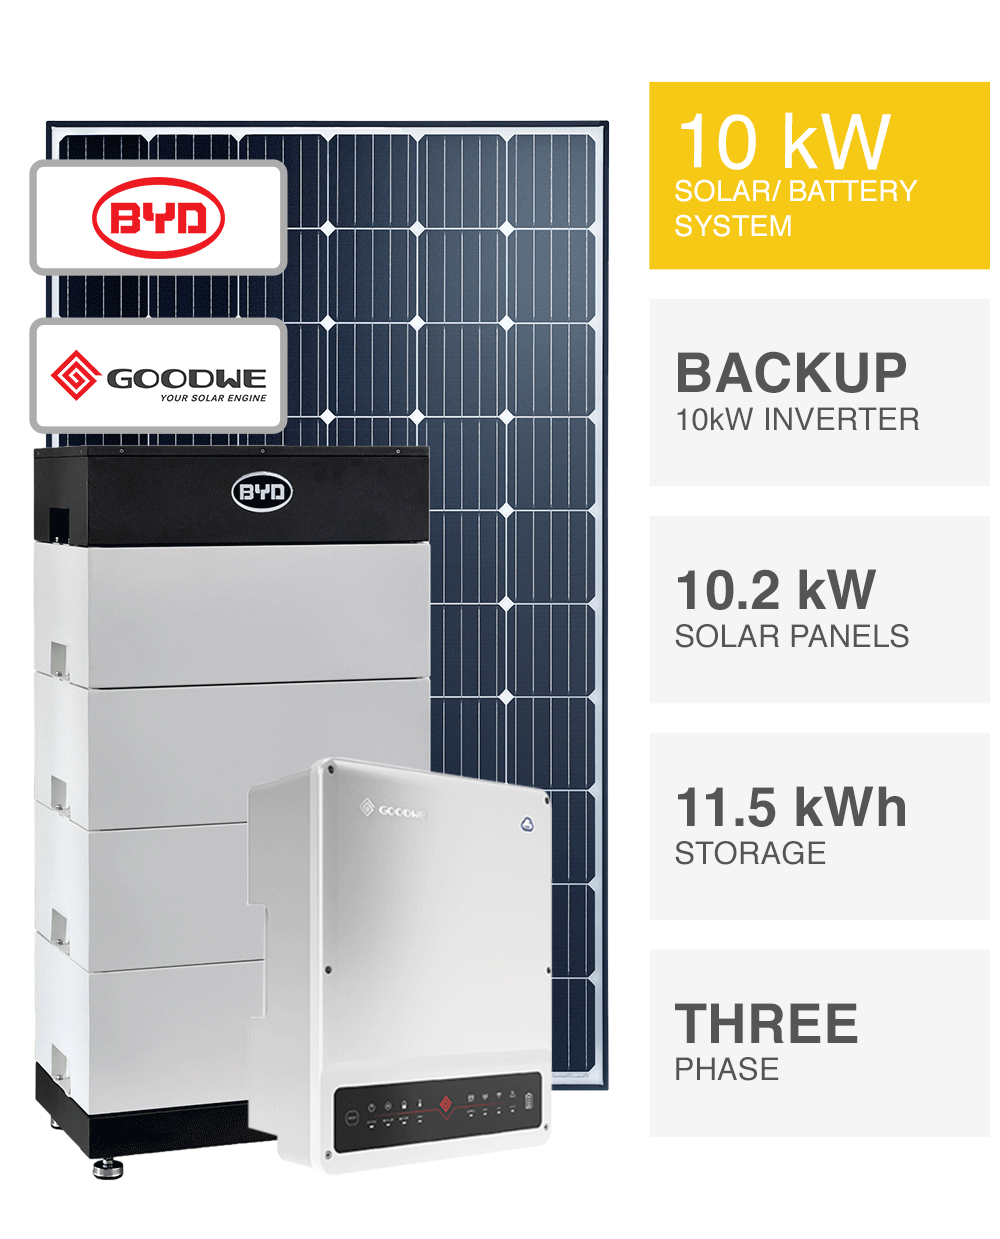 3-Phase 10kW Solar System with Battery Backup, (installed prices).